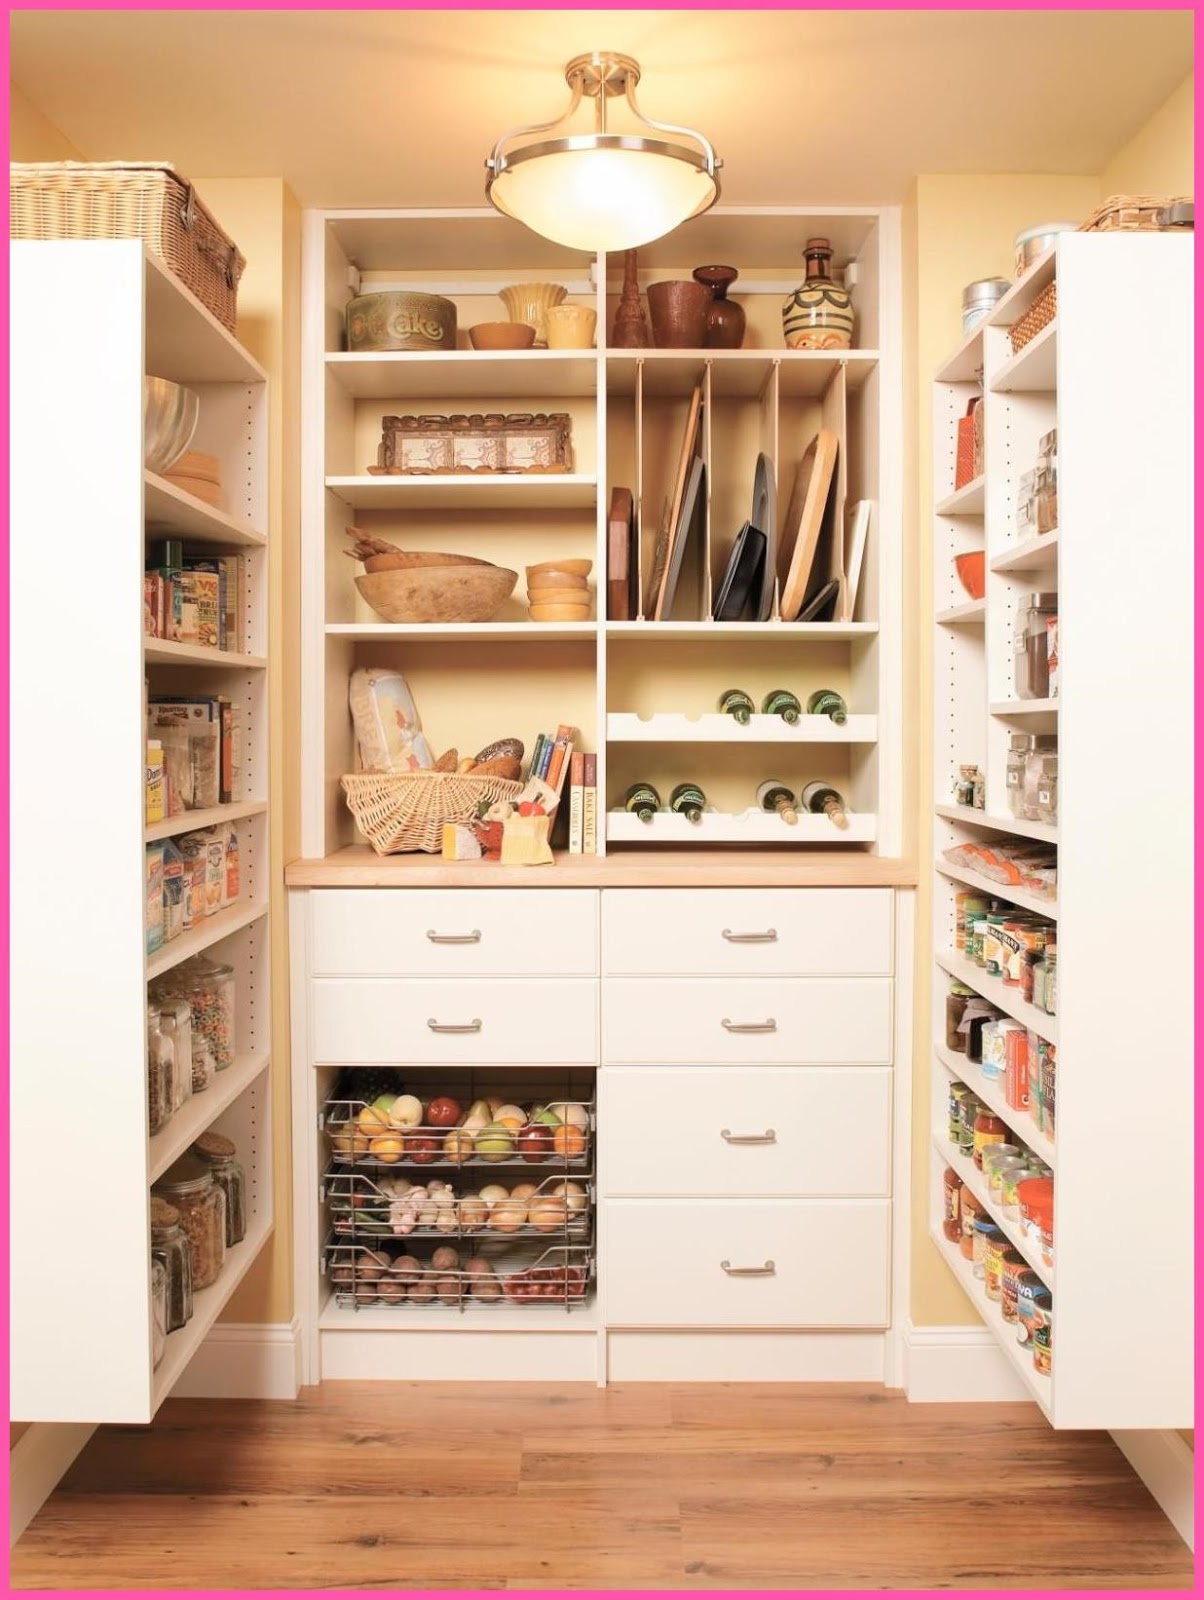 7 Stand Alone Kitchen Pantry Uk  Pictures Kitchen Pantry Designs Ideas Kitchen,Pantry,Stand,Alone